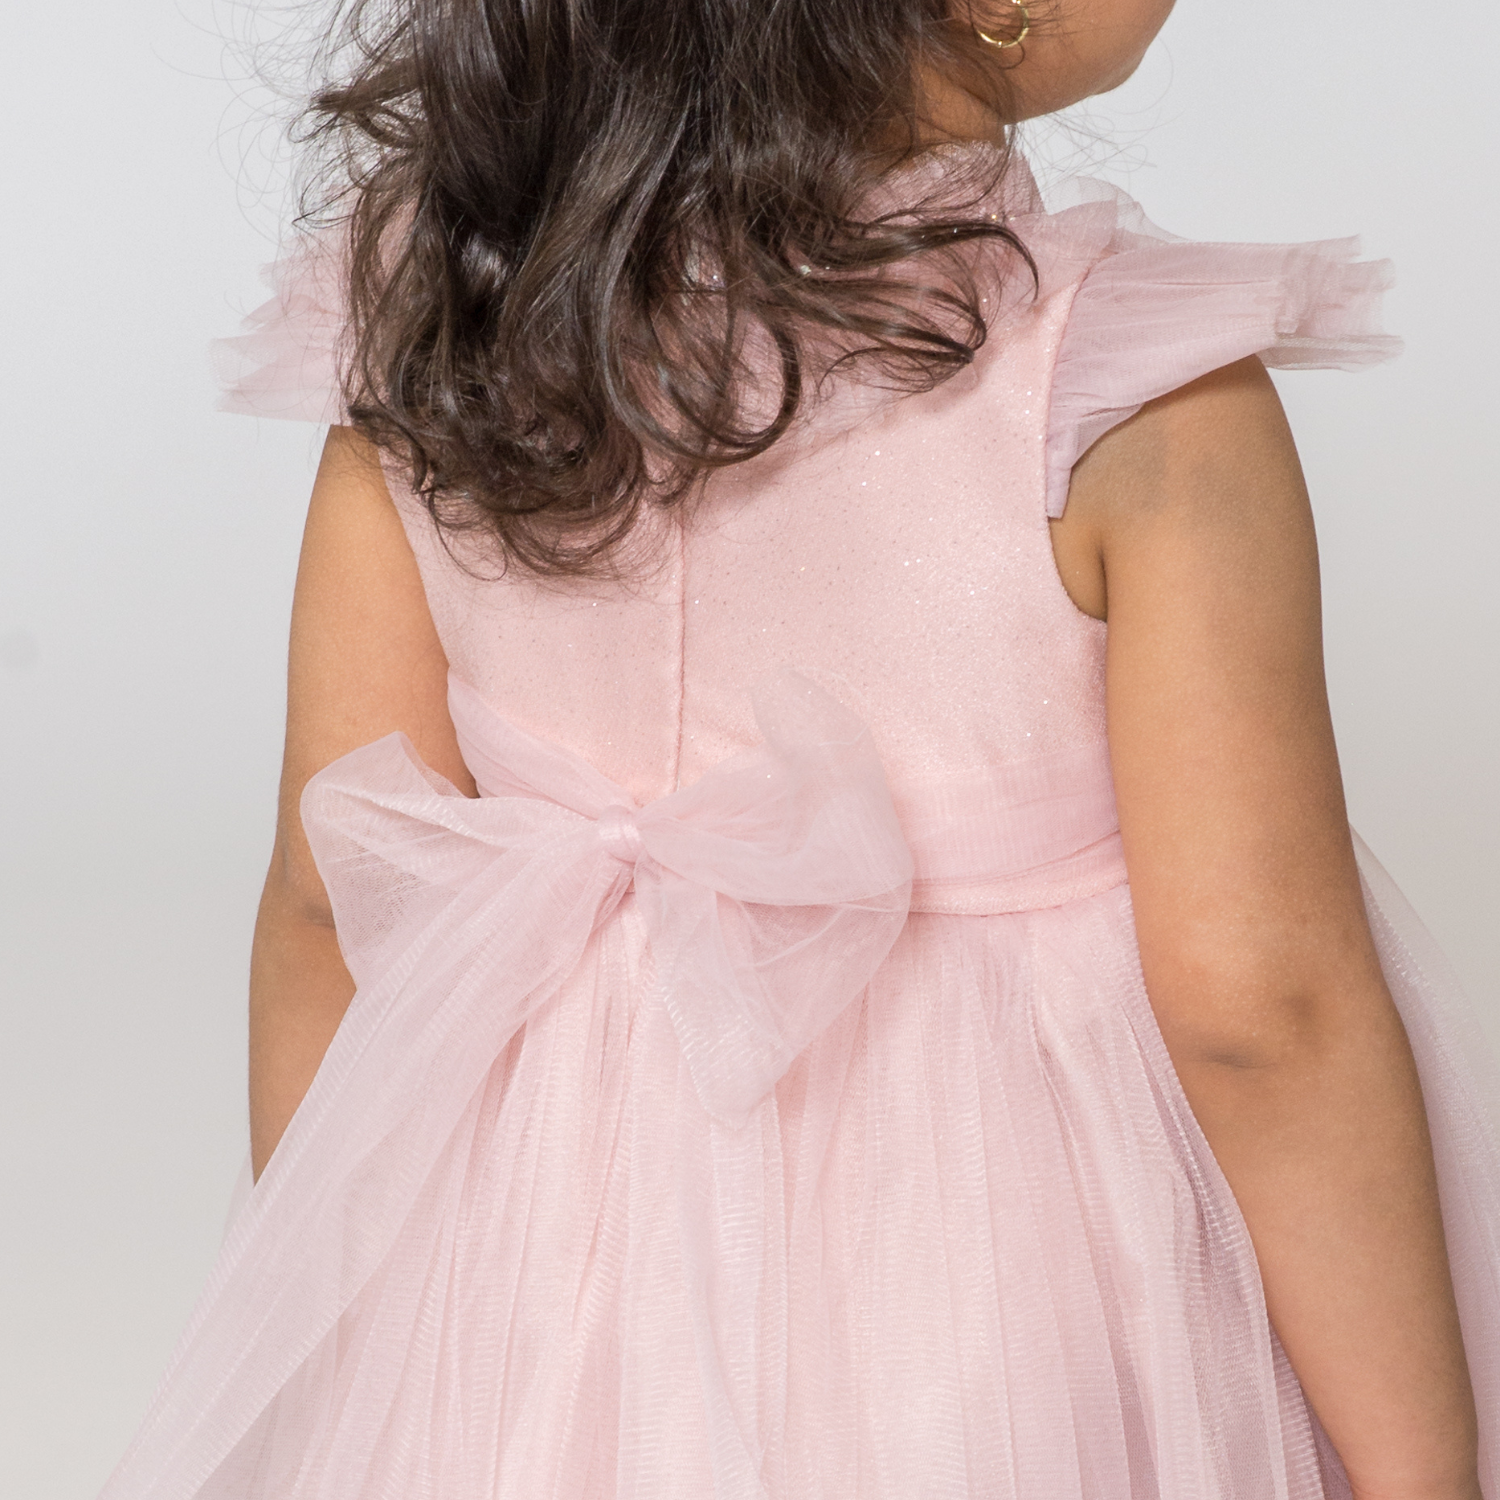 Baby Tania's Tulle Dress